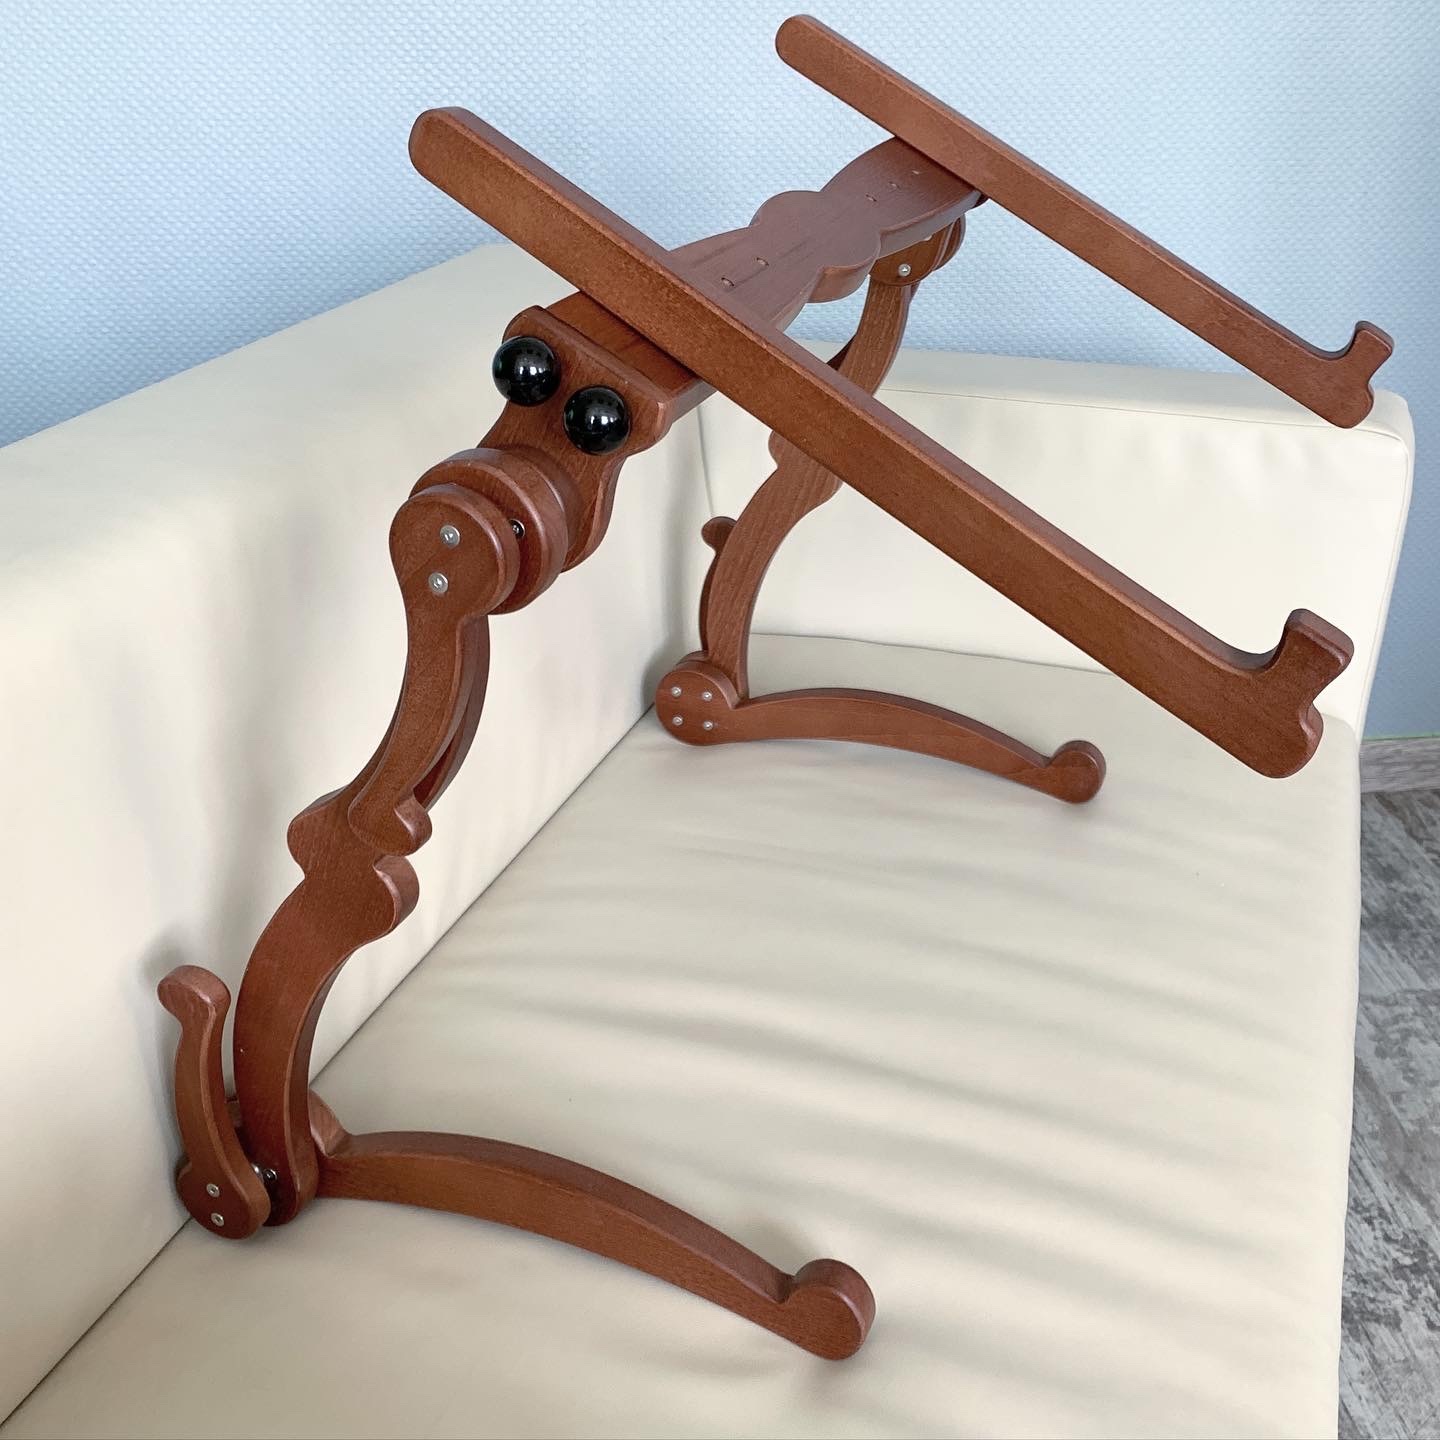 Dubko Embroidery Floor Stand